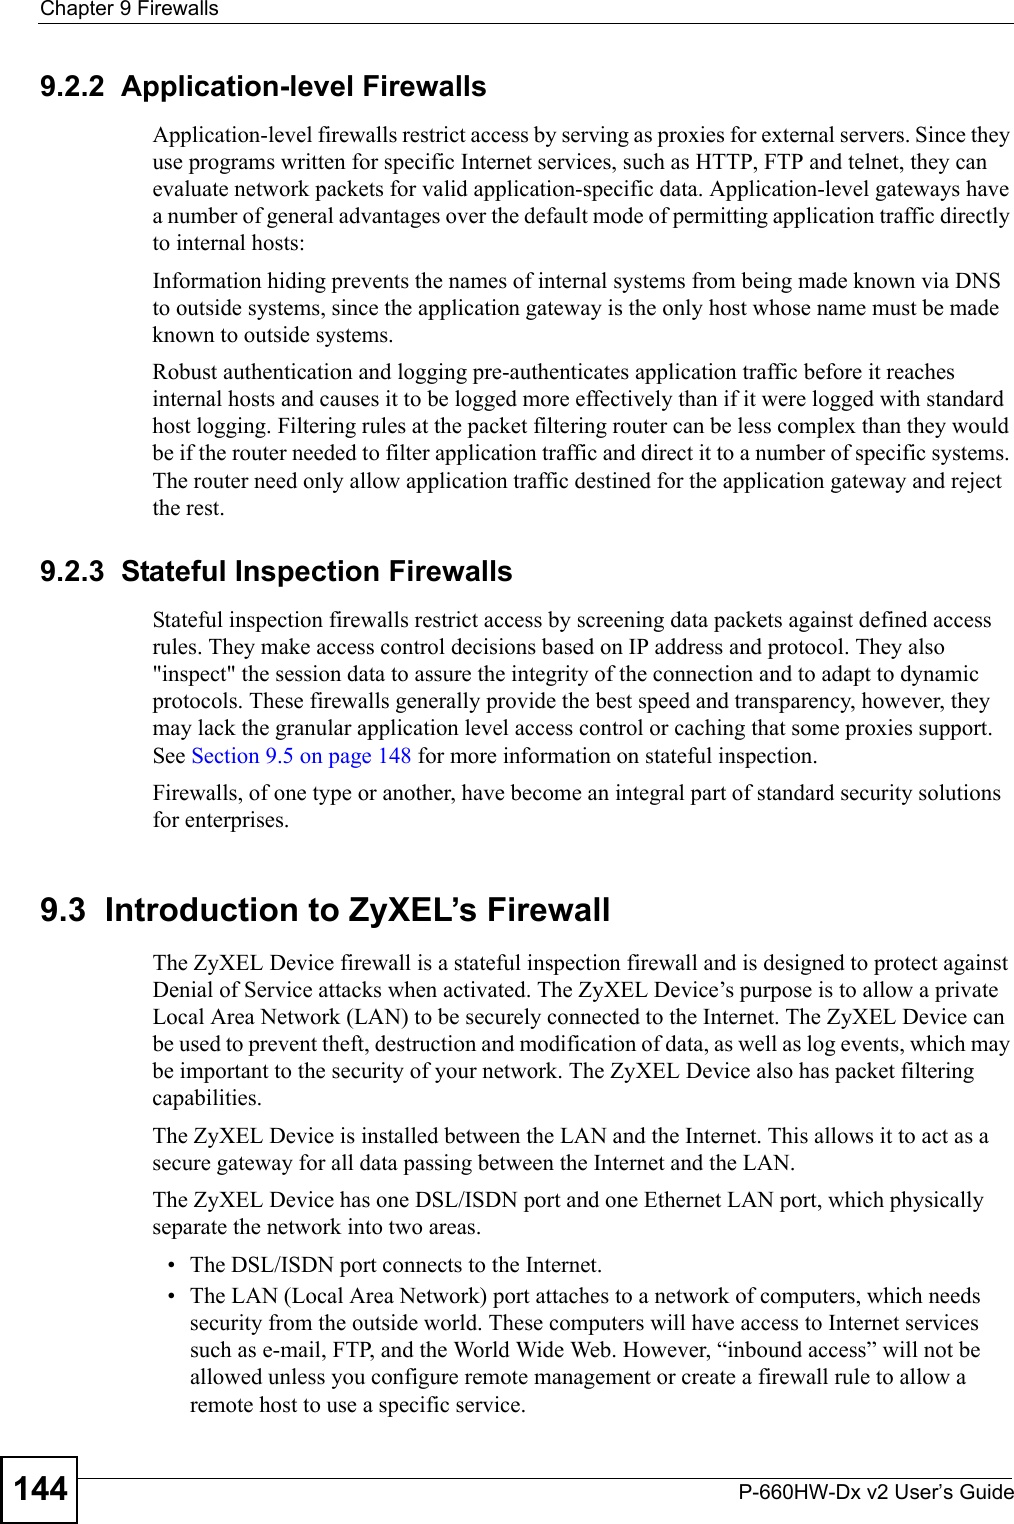 Chapter 9 FirewallsP-660HW-Dx v2 User’s Guide1449.2.2  Application-level FirewallsApplication-level firewalls restrict access by serving as proxies for external servers. Since they use programs written for specific Internet services, such as HTTP, FTP and telnet, they can evaluate network packets for valid application-specific data. Application-level gateways have a number of general advantages over the default mode of permitting application traffic directly to internal hosts:Information hiding prevents the names of internal systems from being made known via DNS to outside systems, since the application gateway is the only host whose name must be made known to outside systems.Robust authentication and logging pre-authenticates application traffic before it reaches internal hosts and causes it to be logged more effectively than if it were logged with standard host logging. Filtering rules at the packet filtering router can be less complex than they would be if the router needed to filter application traffic and direct it to a number of specific systems. The router need only allow application traffic destined for the application gateway and reject the rest.9.2.3  Stateful Inspection Firewalls Stateful inspection firewalls restrict access by screening data packets against defined access rules. They make access control decisions based on IP address and protocol. They also &quot;inspect&quot; the session data to assure the integrity of the connection and to adapt to dynamic protocols. These firewalls generally provide the best speed and transparency, however, they may lack the granular application level access control or caching that some proxies support. See Section 9.5 on page 148 for more information on stateful inspection.Firewalls, of one type or another, have become an integral part of standard security solutions for enterprises.9.3  Introduction to ZyXEL’s FirewallThe ZyXEL Device firewall is a stateful inspection firewall and is designed to protect against Denial of Service attacks when activated. The ZyXEL Device’s purpose is to allow a private Local Area Network (LAN) to be securely connected to the Internet. The ZyXEL Device can be used to prevent theft, destruction and modification of data, as well as log events, which may be important to the security of your network. The ZyXEL Device also has packet filtering capabilities.The ZyXEL Device is installed between the LAN and the Internet. This allows it to act as a secure gateway for all data passing between the Internet and the LAN.The ZyXEL Device has one DSL/ISDN port and one Ethernet LAN port, which physically separate the network into two areas.• The DSL/ISDN port connects to the Internet.• The LAN (Local Area Network) port attaches to a network of computers, which needs security from the outside world. These computers will have access to Internet services such as e-mail, FTP, and the World Wide Web. However, “inbound access” will not be allowed unless you configure remote management or create a firewall rule to allow a remote host to use a specific service.